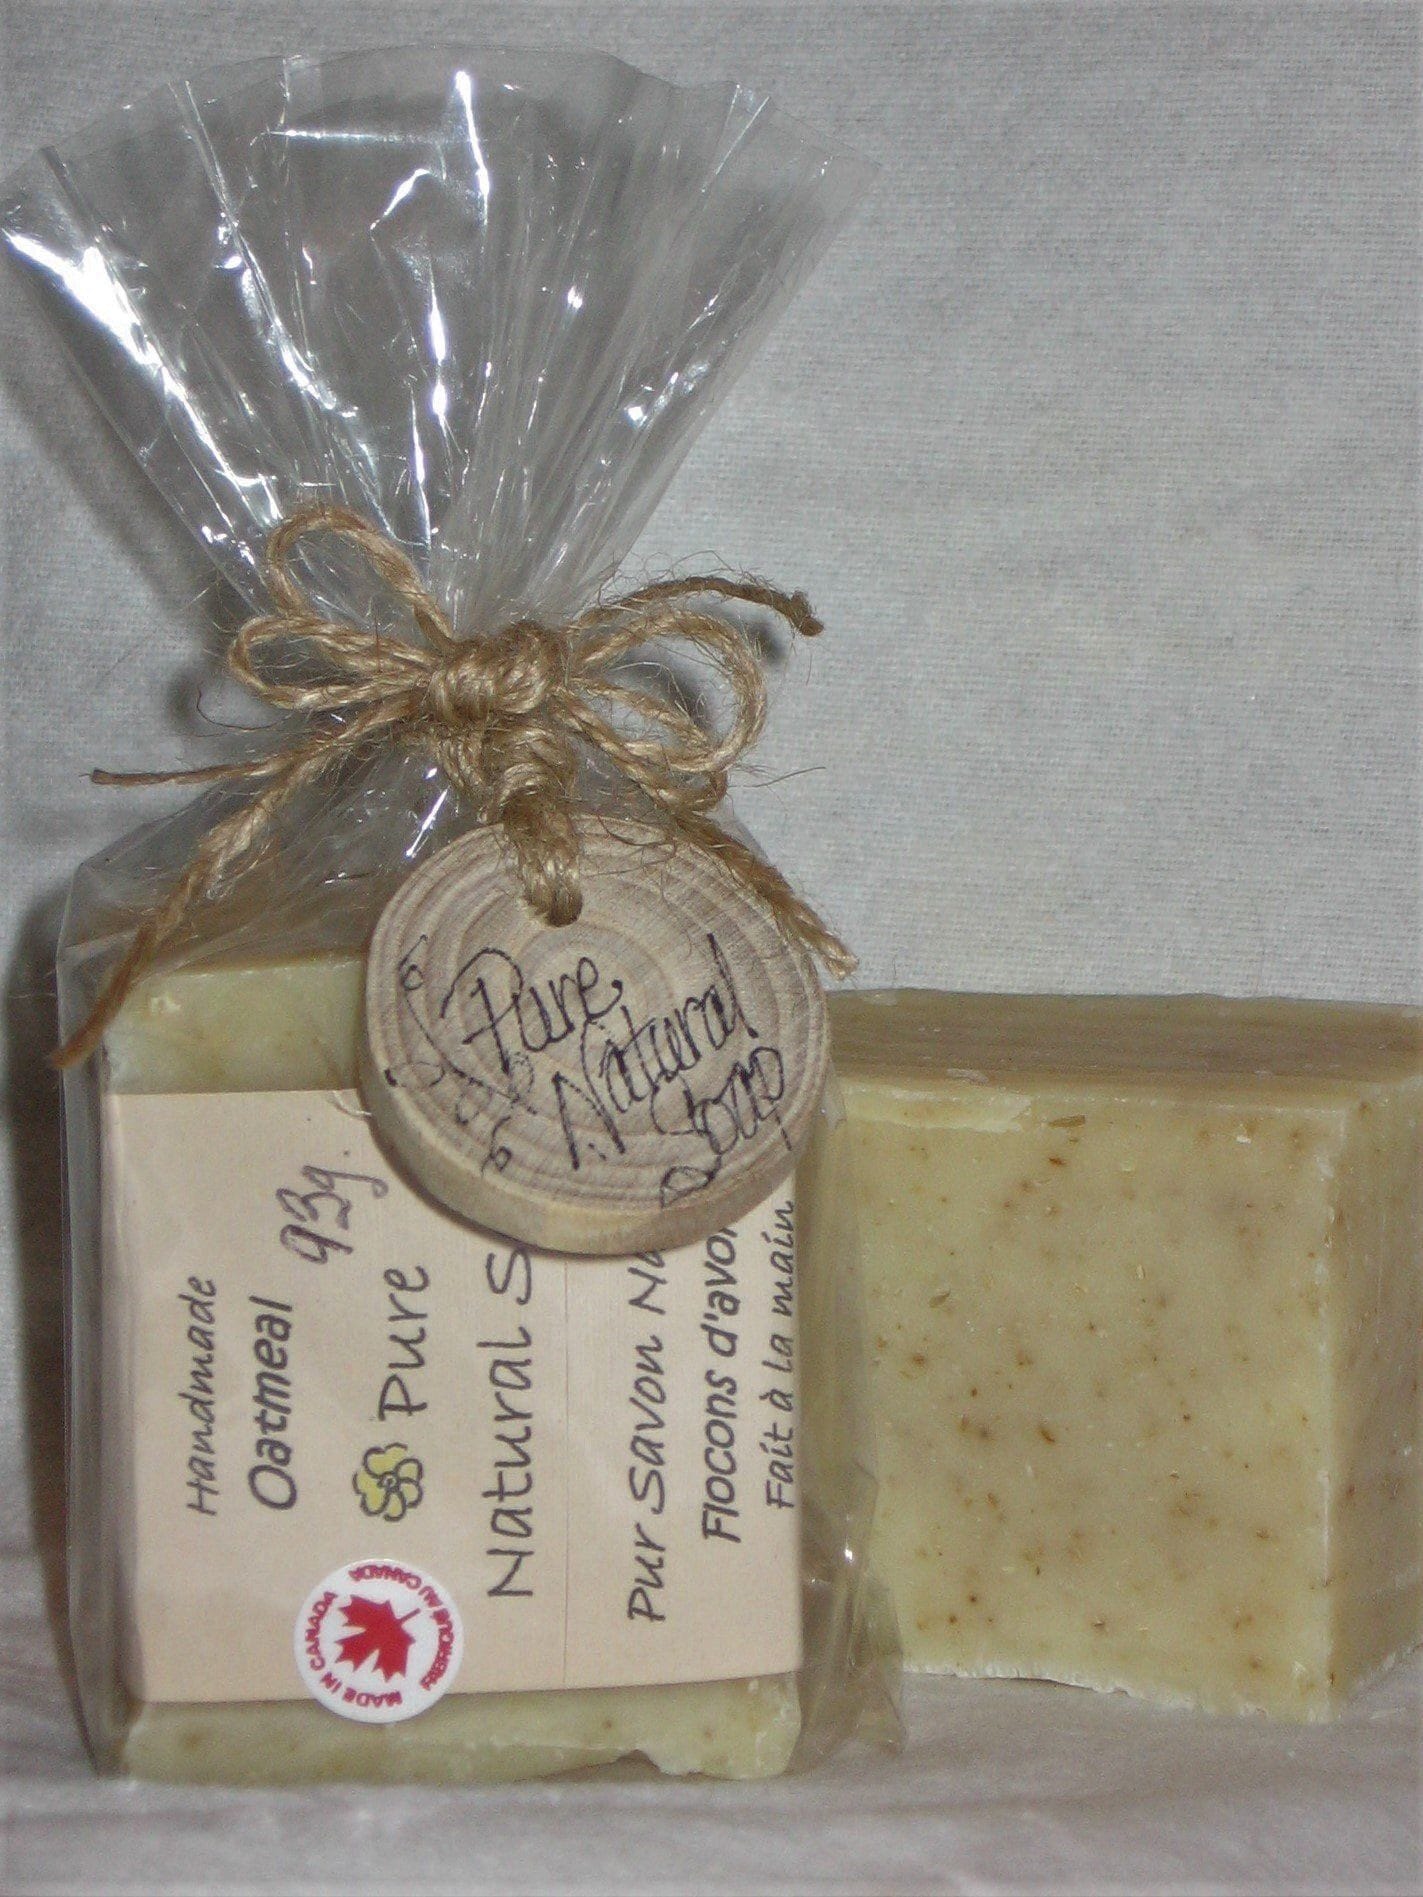 This pure natural soap is a popular choice as an inexpensive handmade natural soap for family every day use.  An appealing light citrus-mint compilation. Vegan